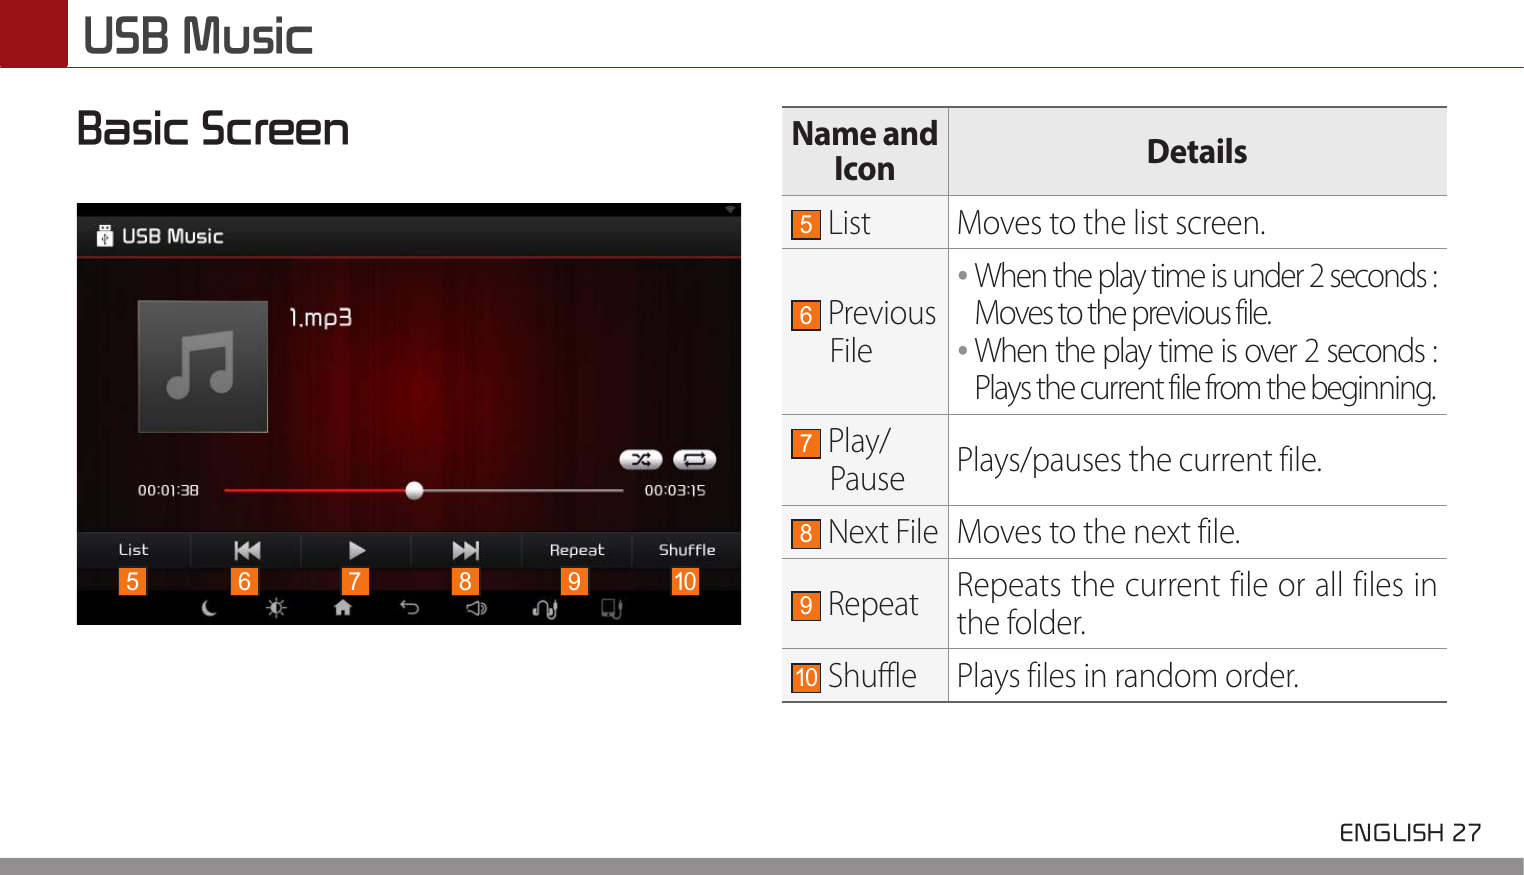  ENGLISH 27 USB MusicBasic ScreenName and Icon Details5 List Moves to the list screen.6 Previous File••When the play time is under 2 seconds :  Moves to the previous file.••When the play time is over 2 seconds :  Plays the current file from the beginning.7 Play/Pause Plays/pauses the current file.8 Next File Moves to the next file.9 Repeat Repeats the current file or all files in the folder.10  Shuffle Plays files in random order.5 76 8 9 10